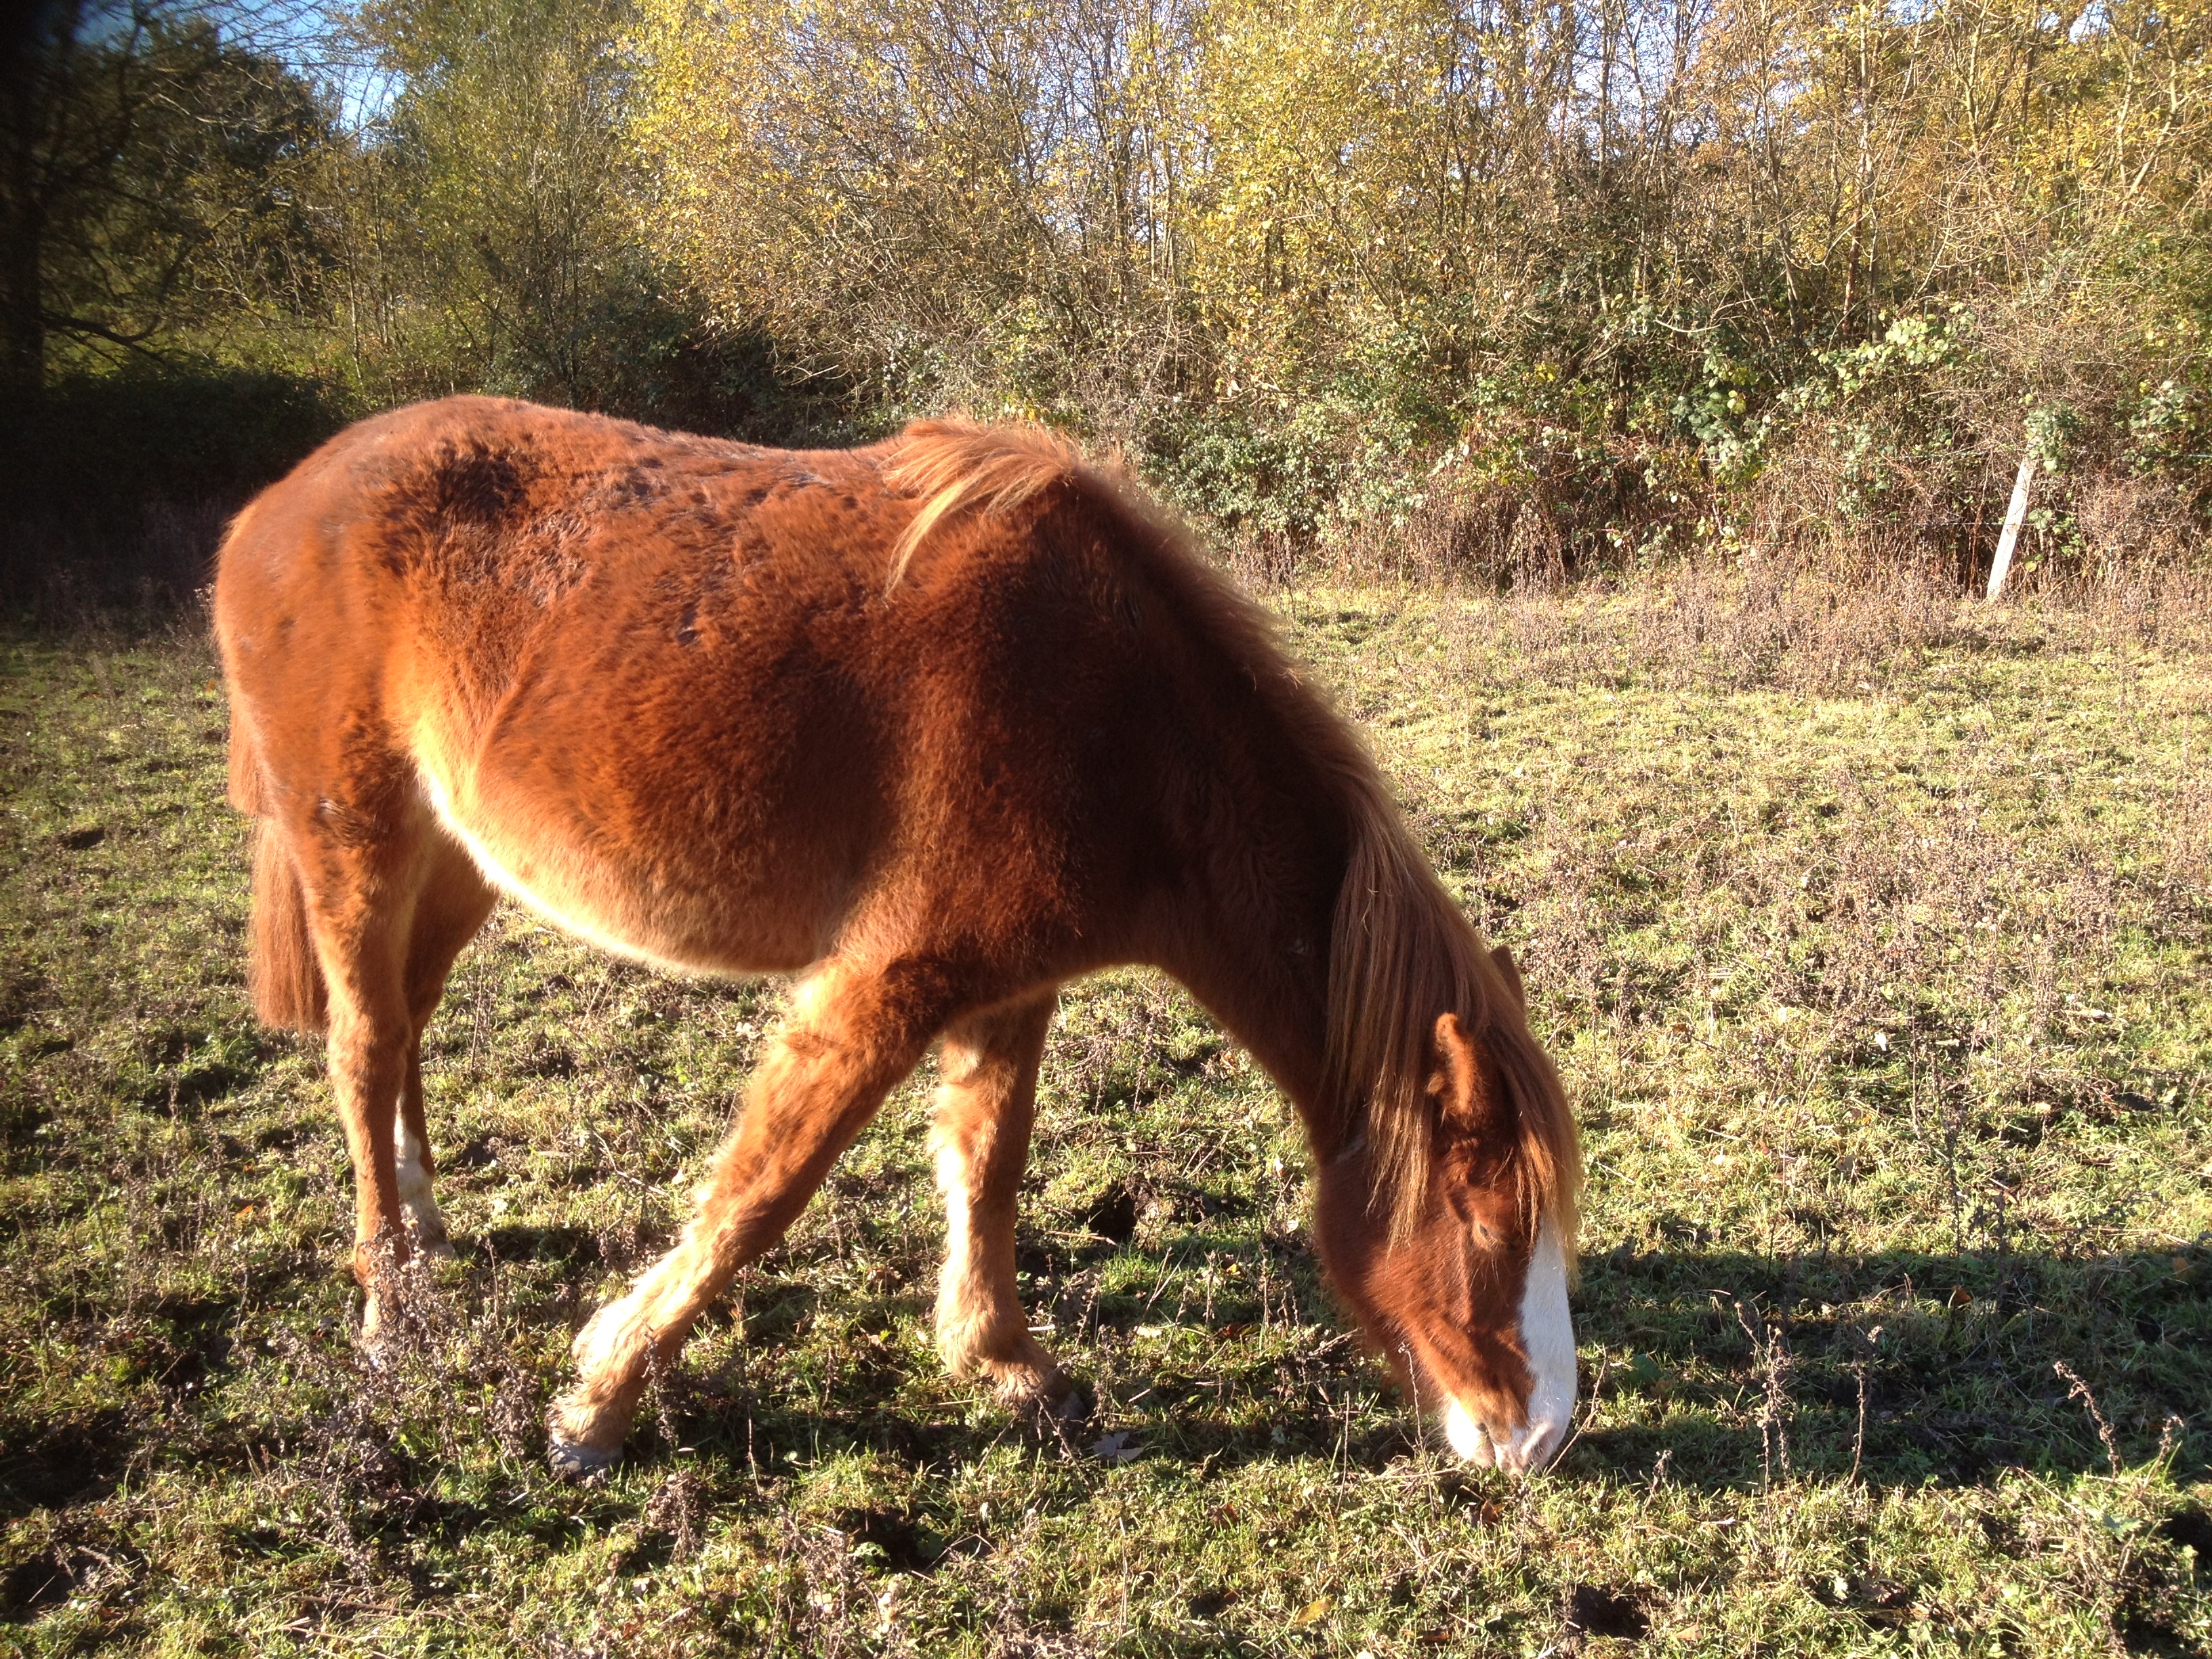 New Forest ponies are hardy and resourceful. Their thick winter coats help to keep them warm and dry.